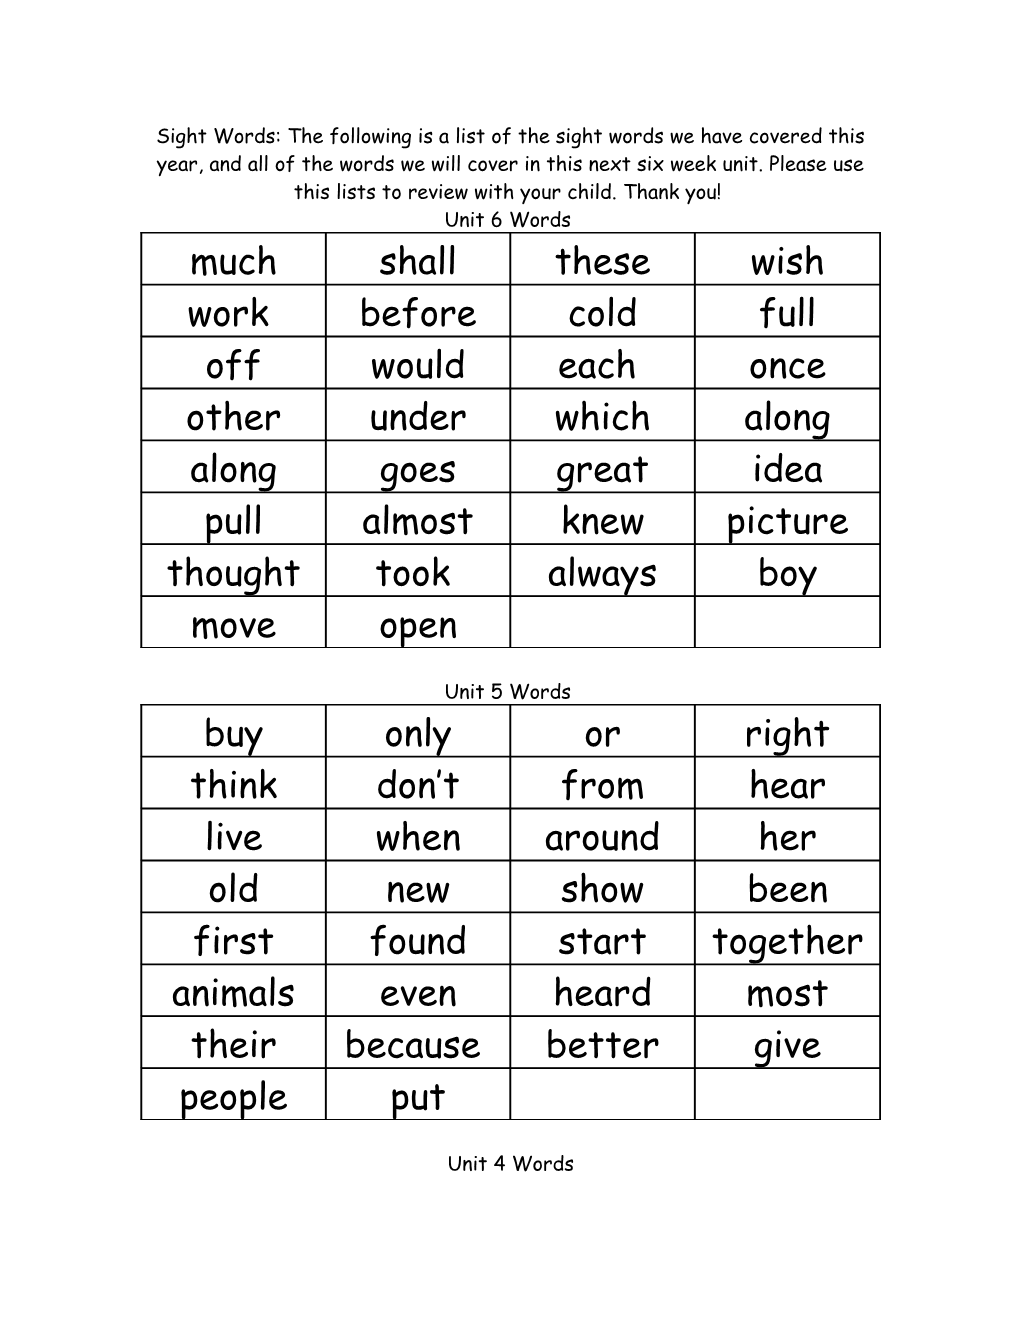 Sight Word List for Unit Two